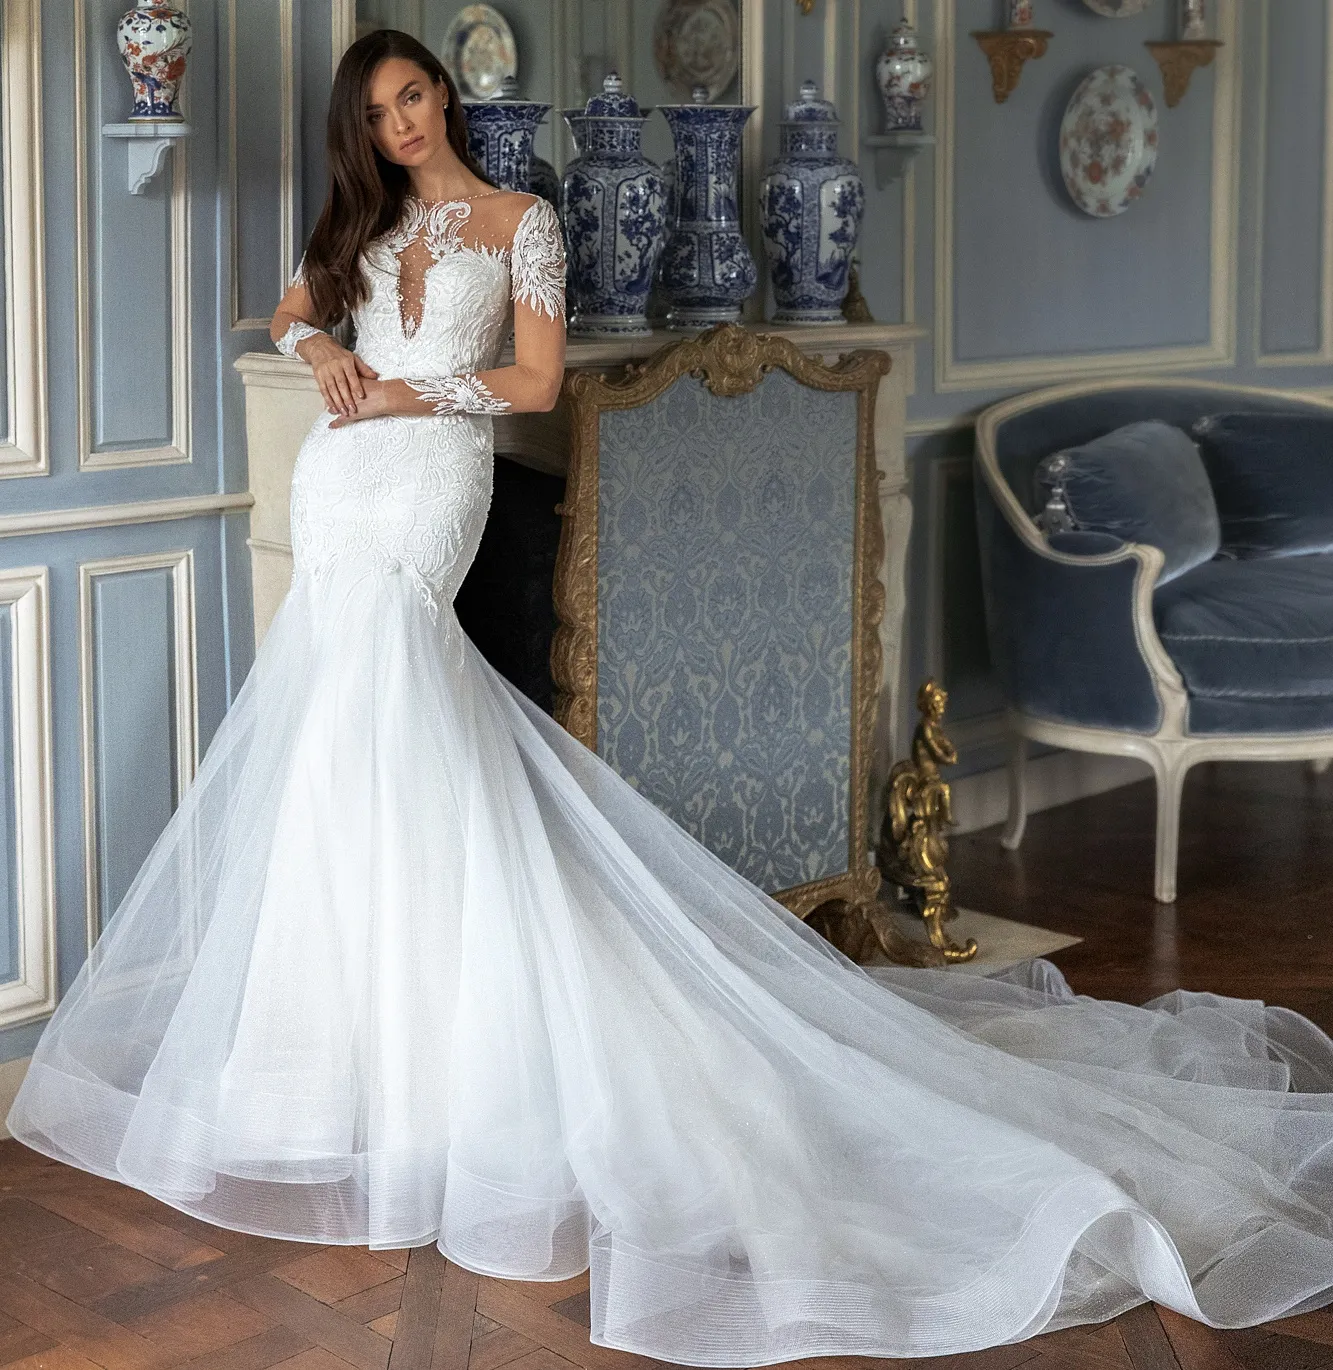 Kate Fitted Elegant Wedding Dress | Dreamers and Lovers